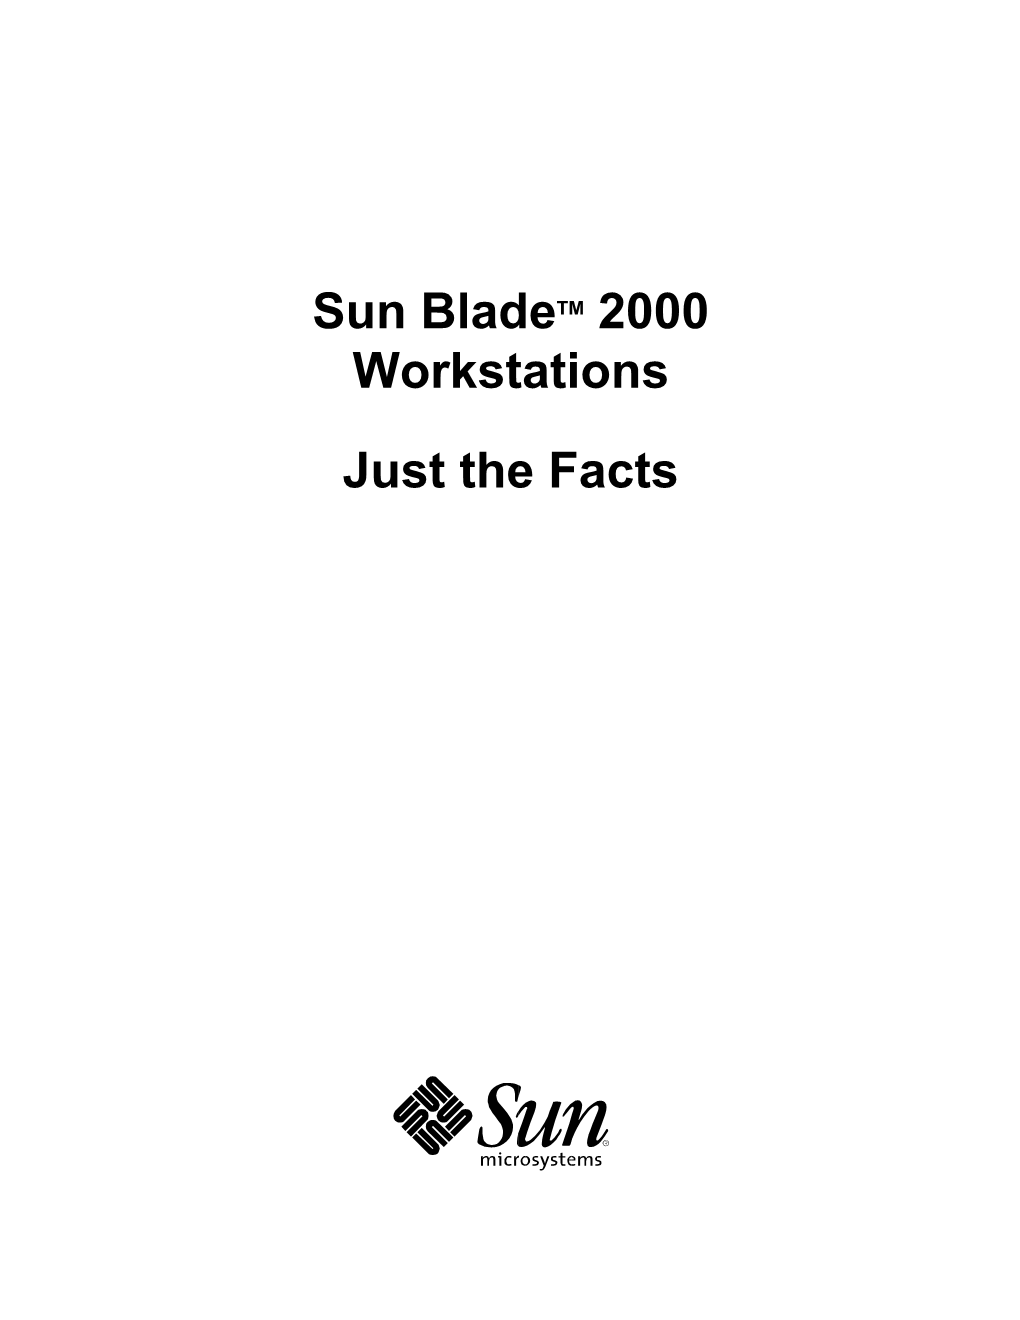 Sun Bladetm 2000 Workstations Just the Facts Copyrights